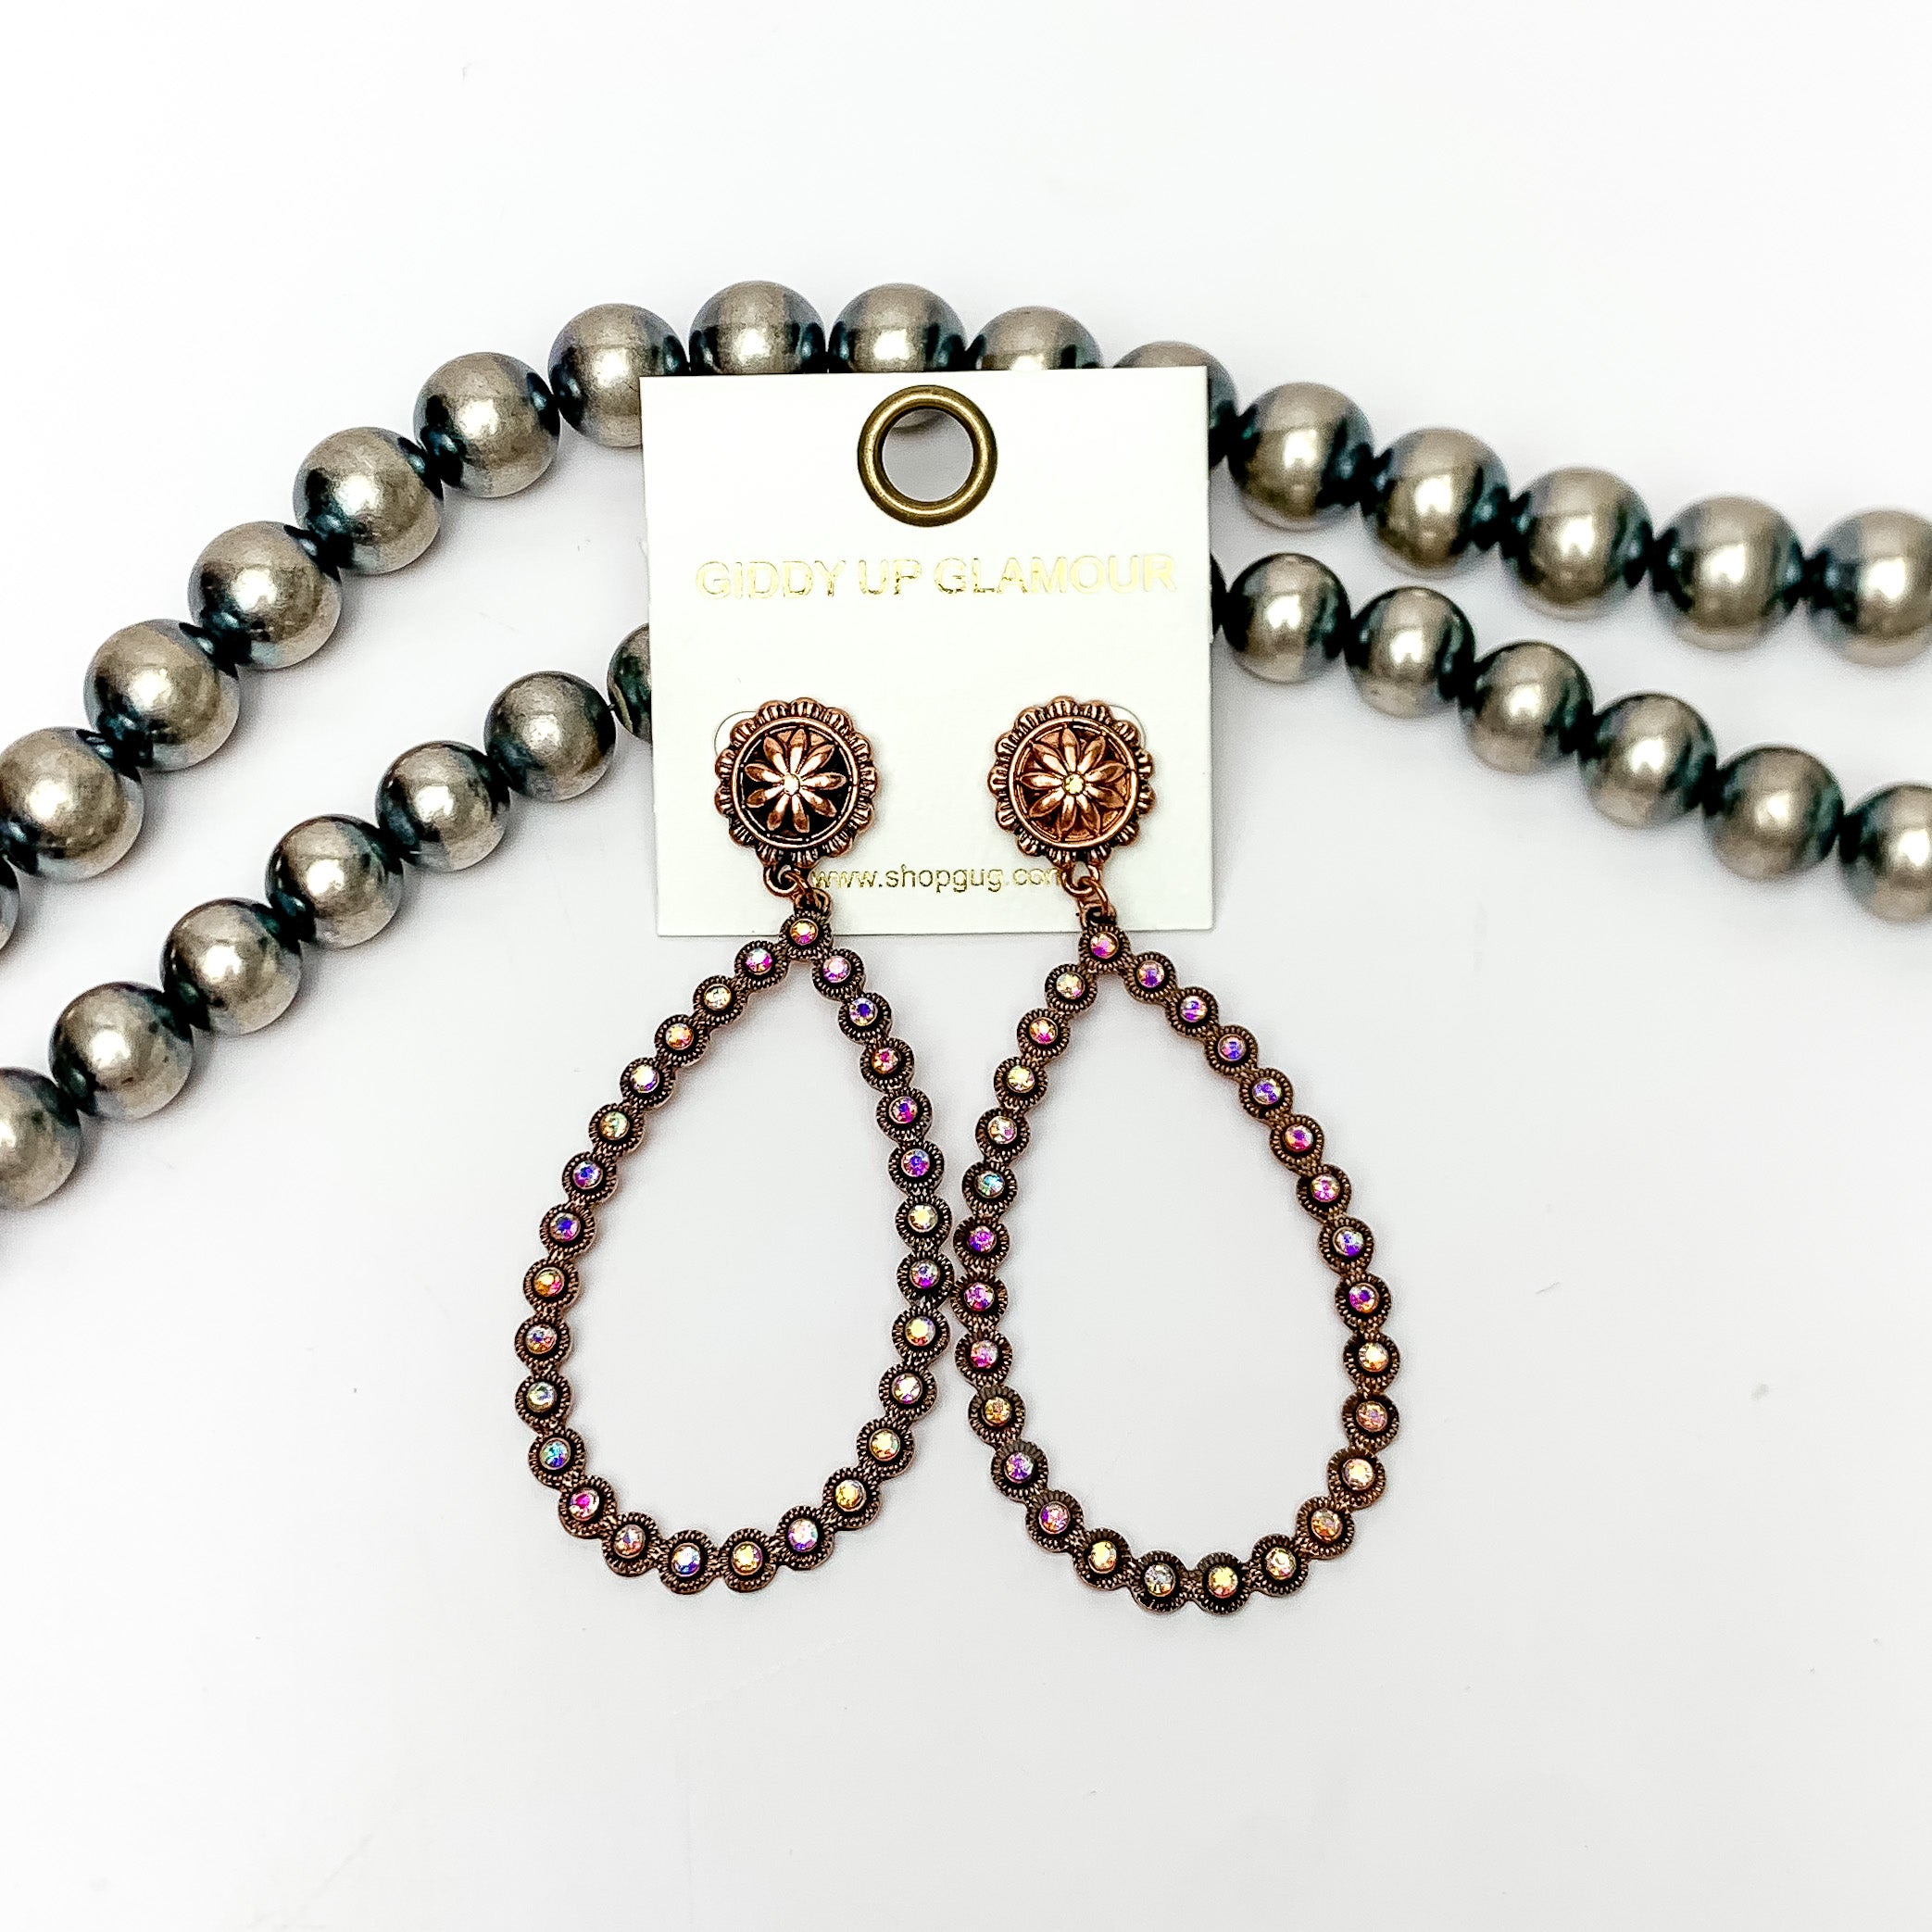 AB Crystal Open Teardrop Earrings in Copper Tone. These open ab crystal teardrop earrings are pictured on a white background with Navajo pearls behind the earrings.